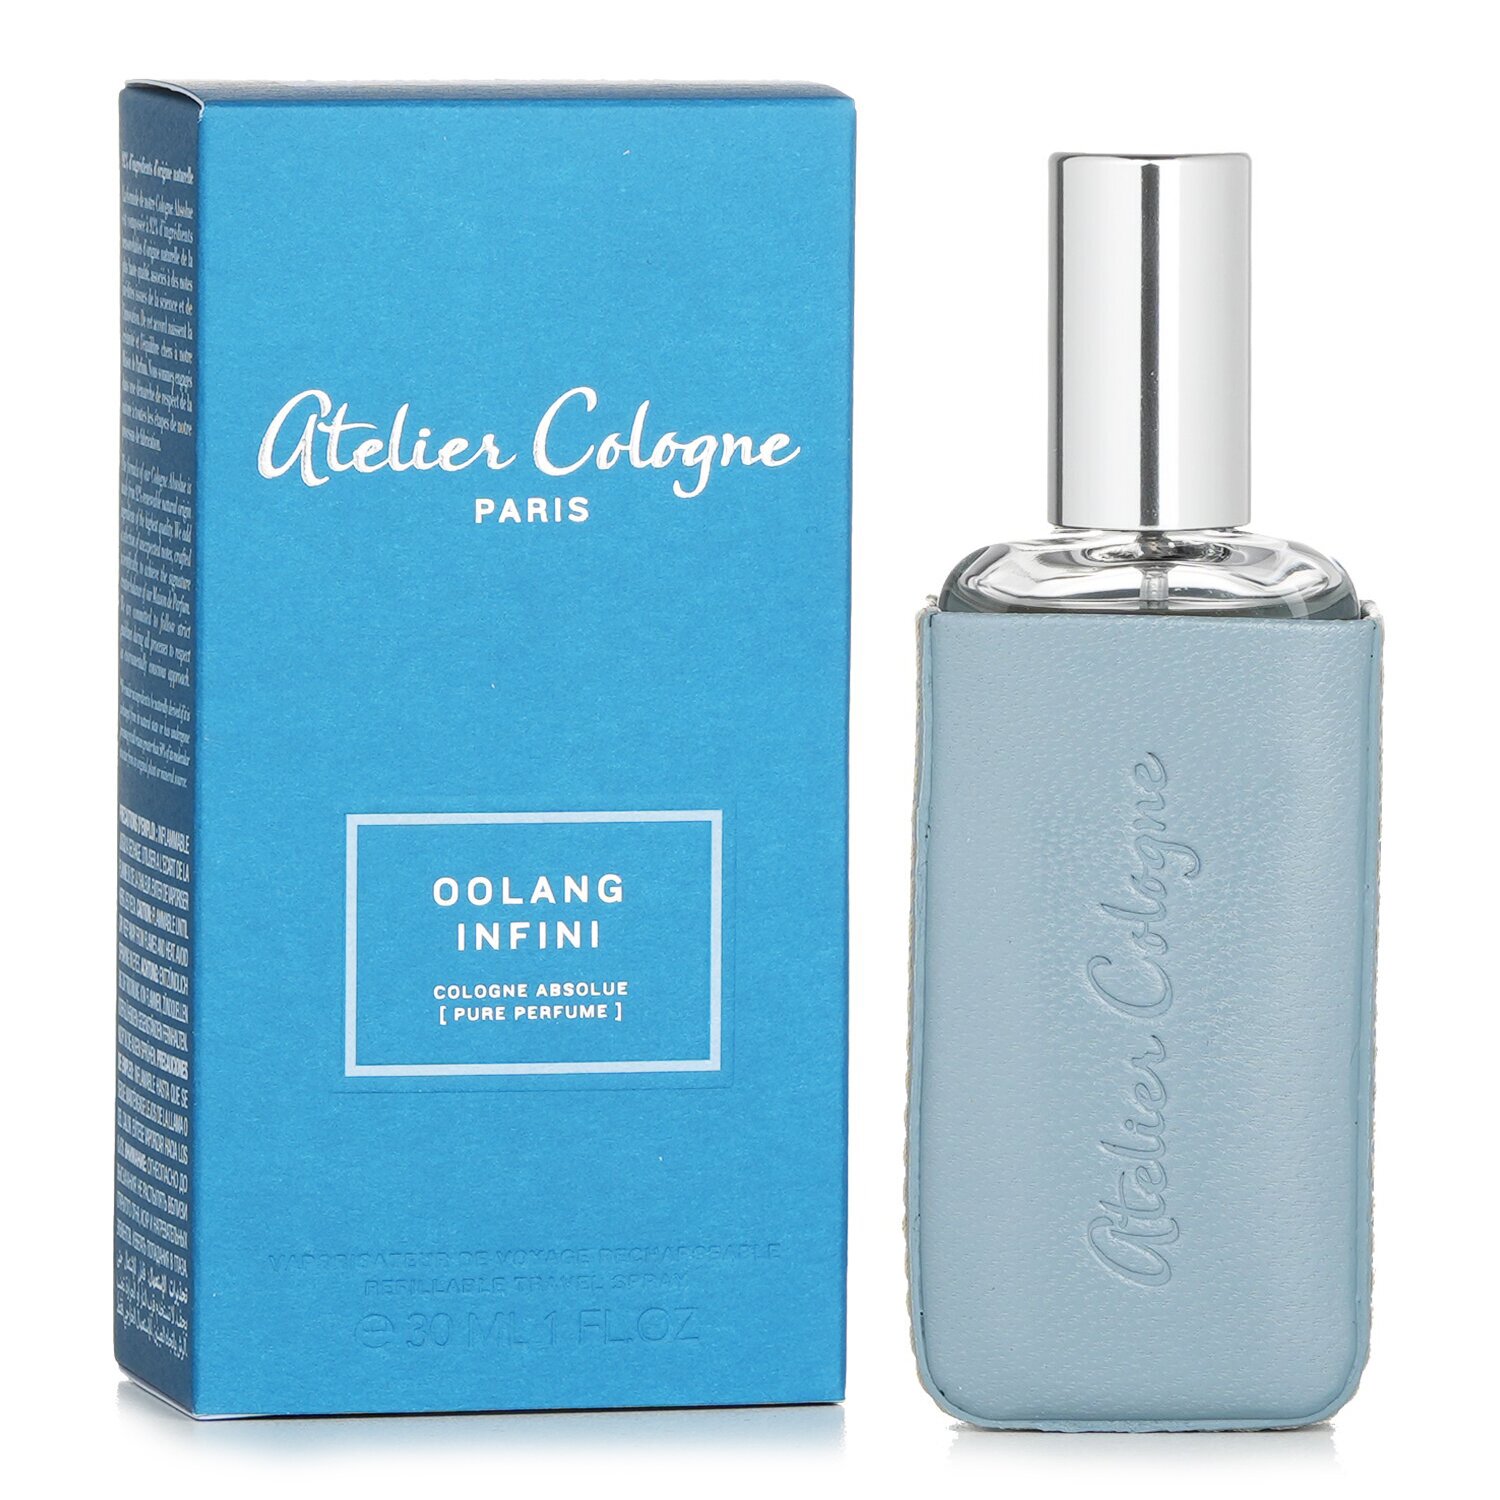 Atelier Cologne Oolang Infini Cologne Absolue Spray 30ml/1oz+Case